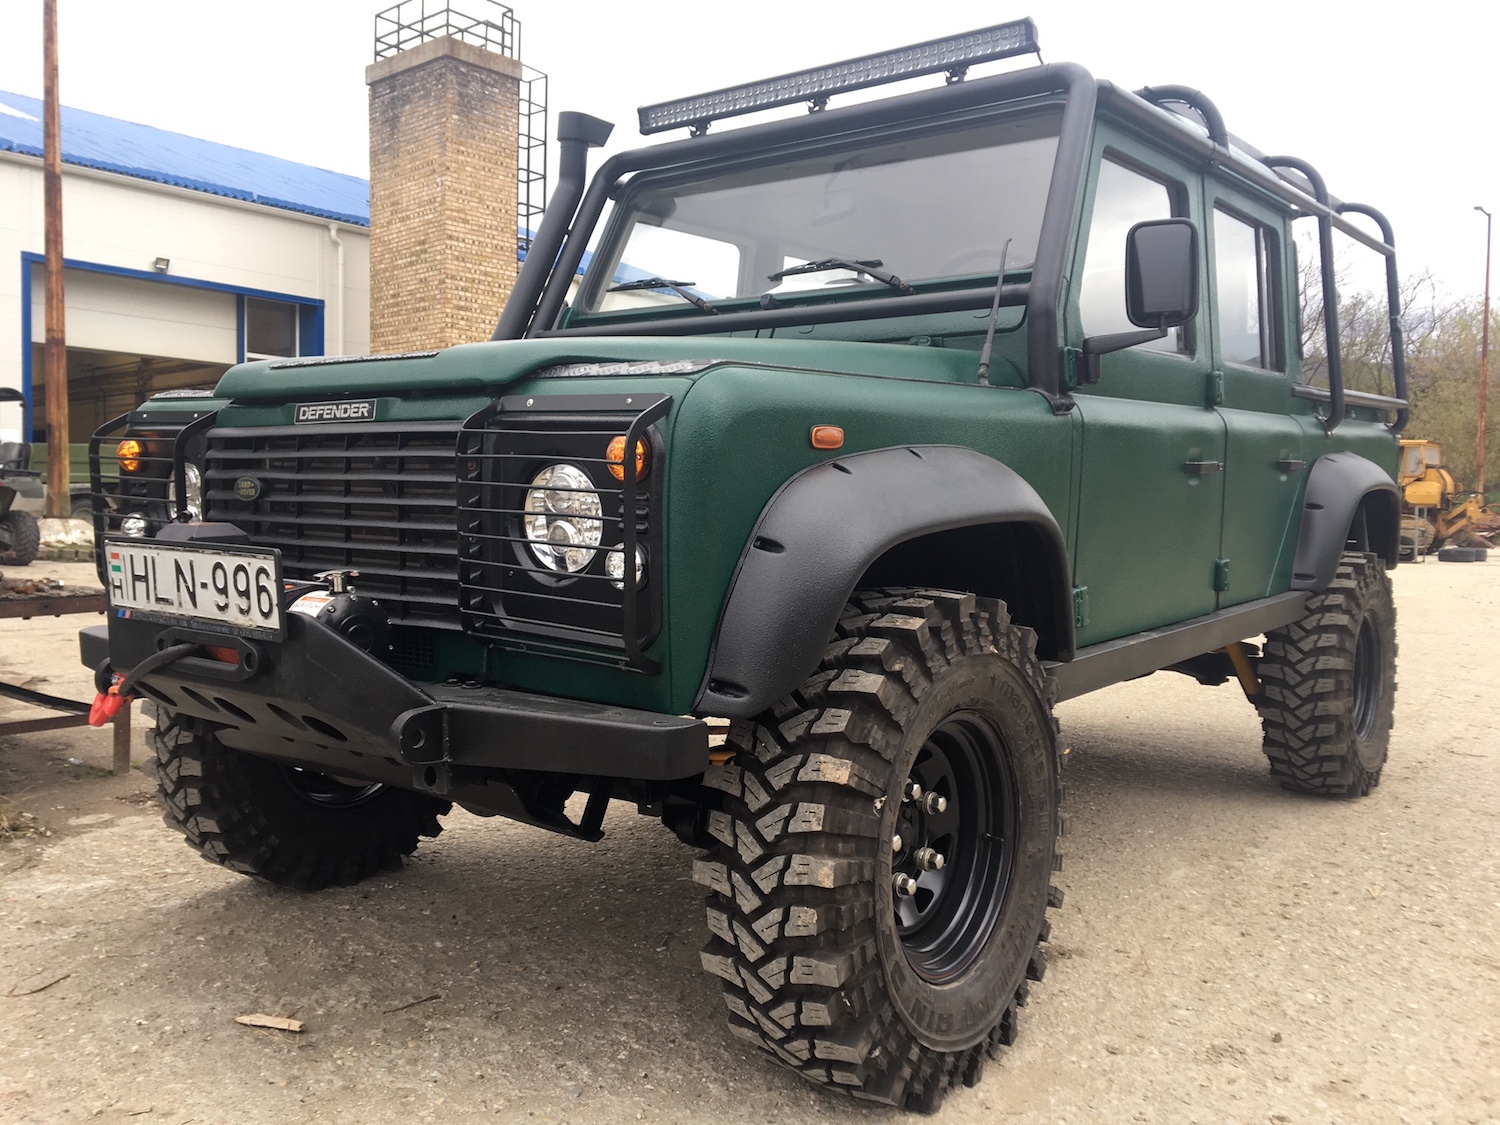 4x4-tuning Kft. land rover referencia